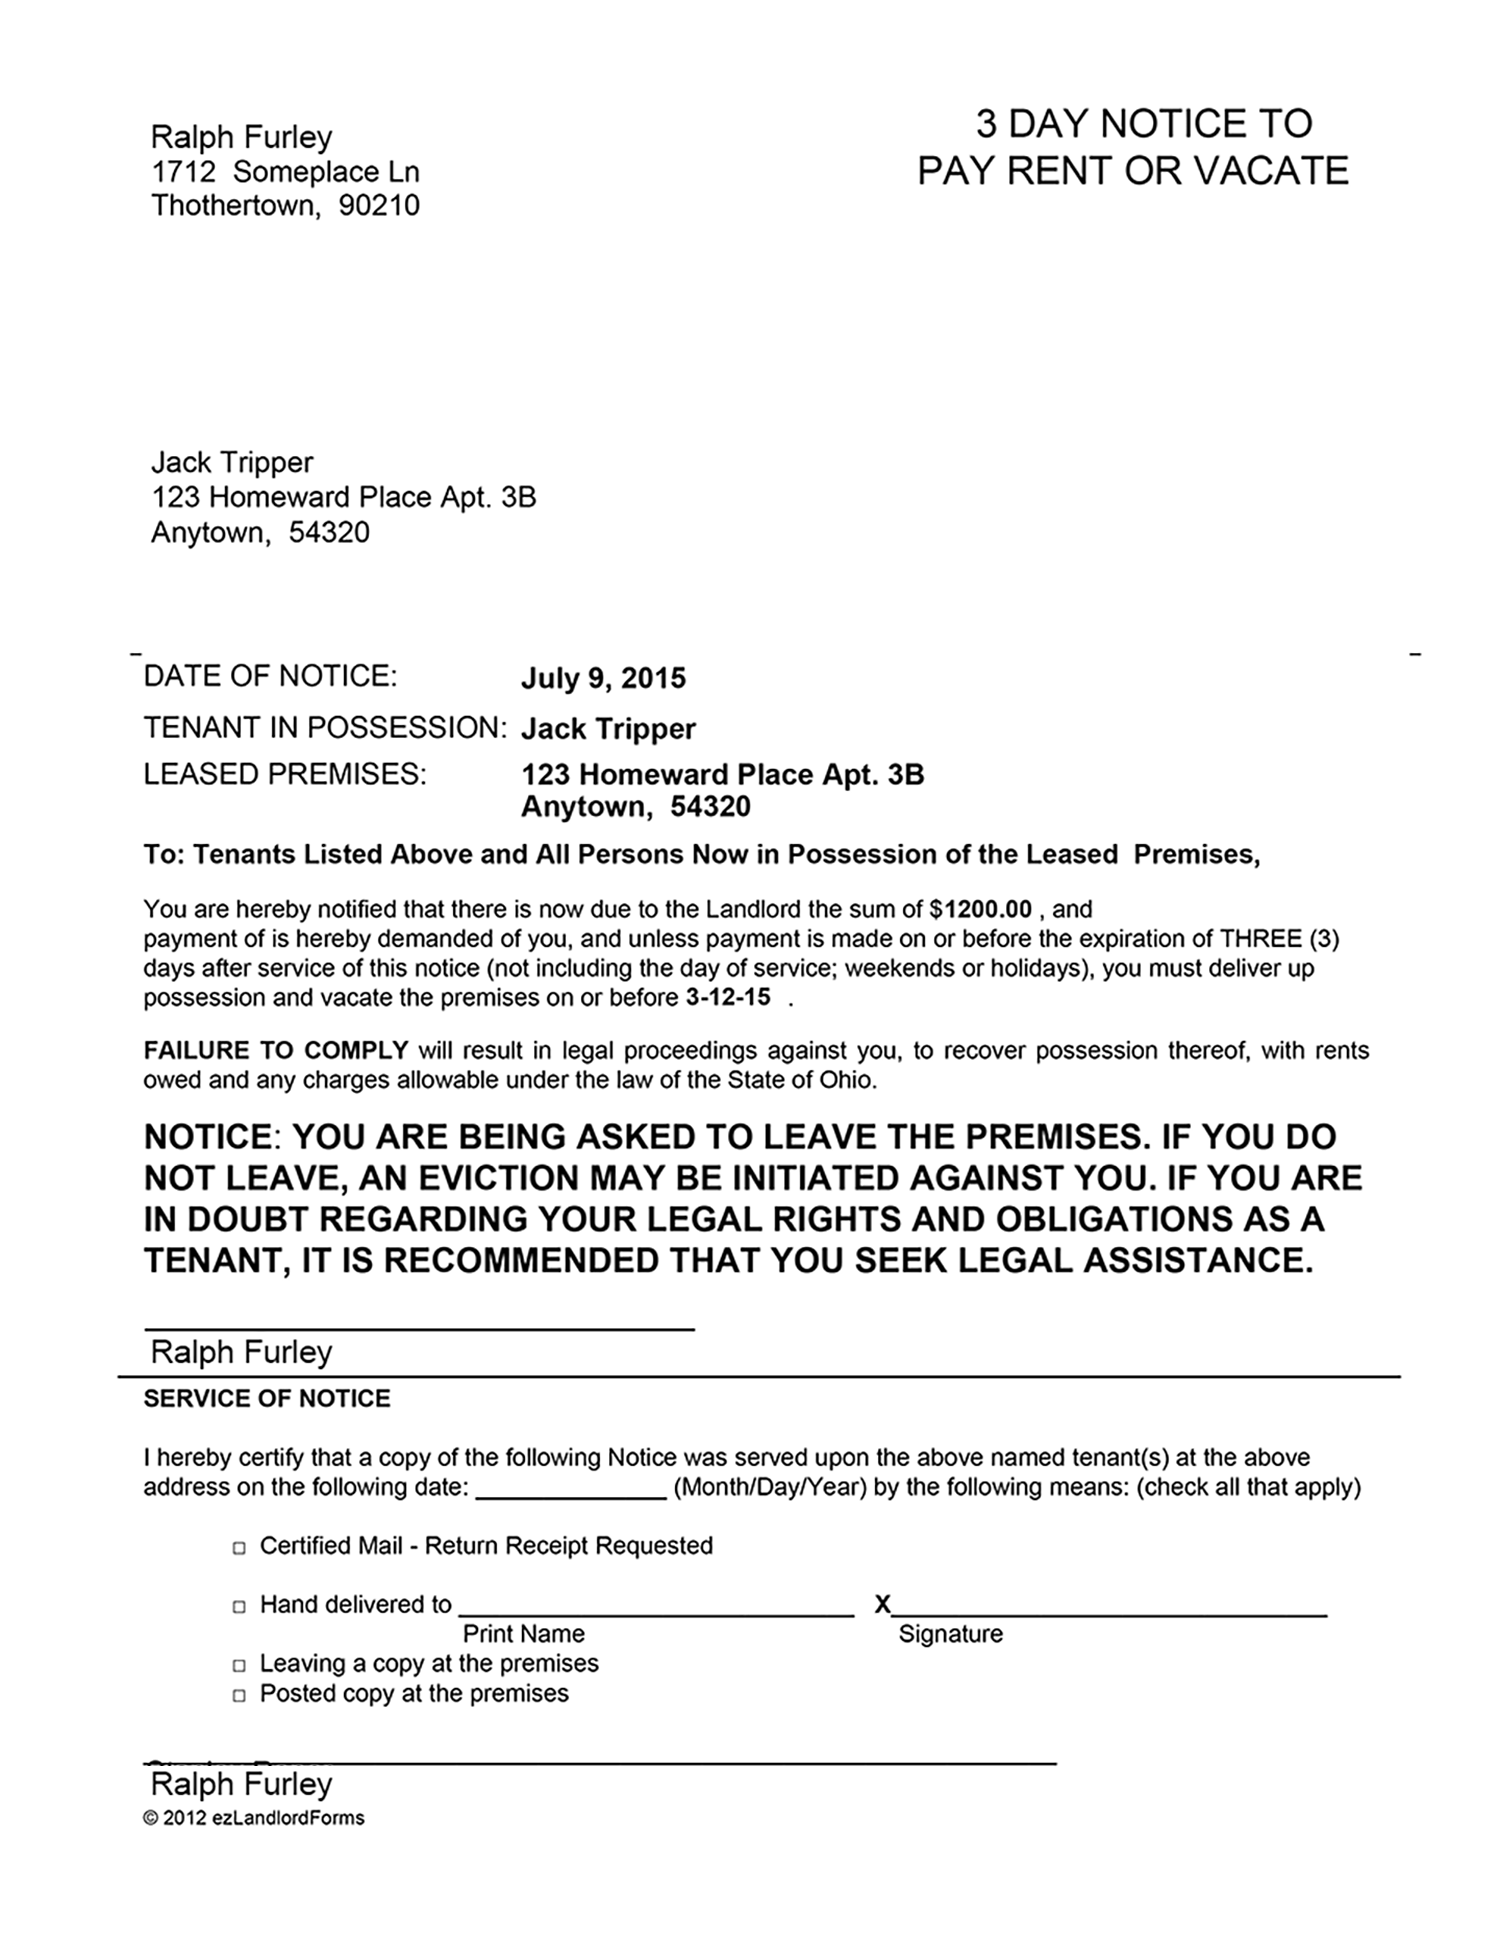 3 Day Notice To Pay Or Vacate Template from www.ezlandlordforms.com